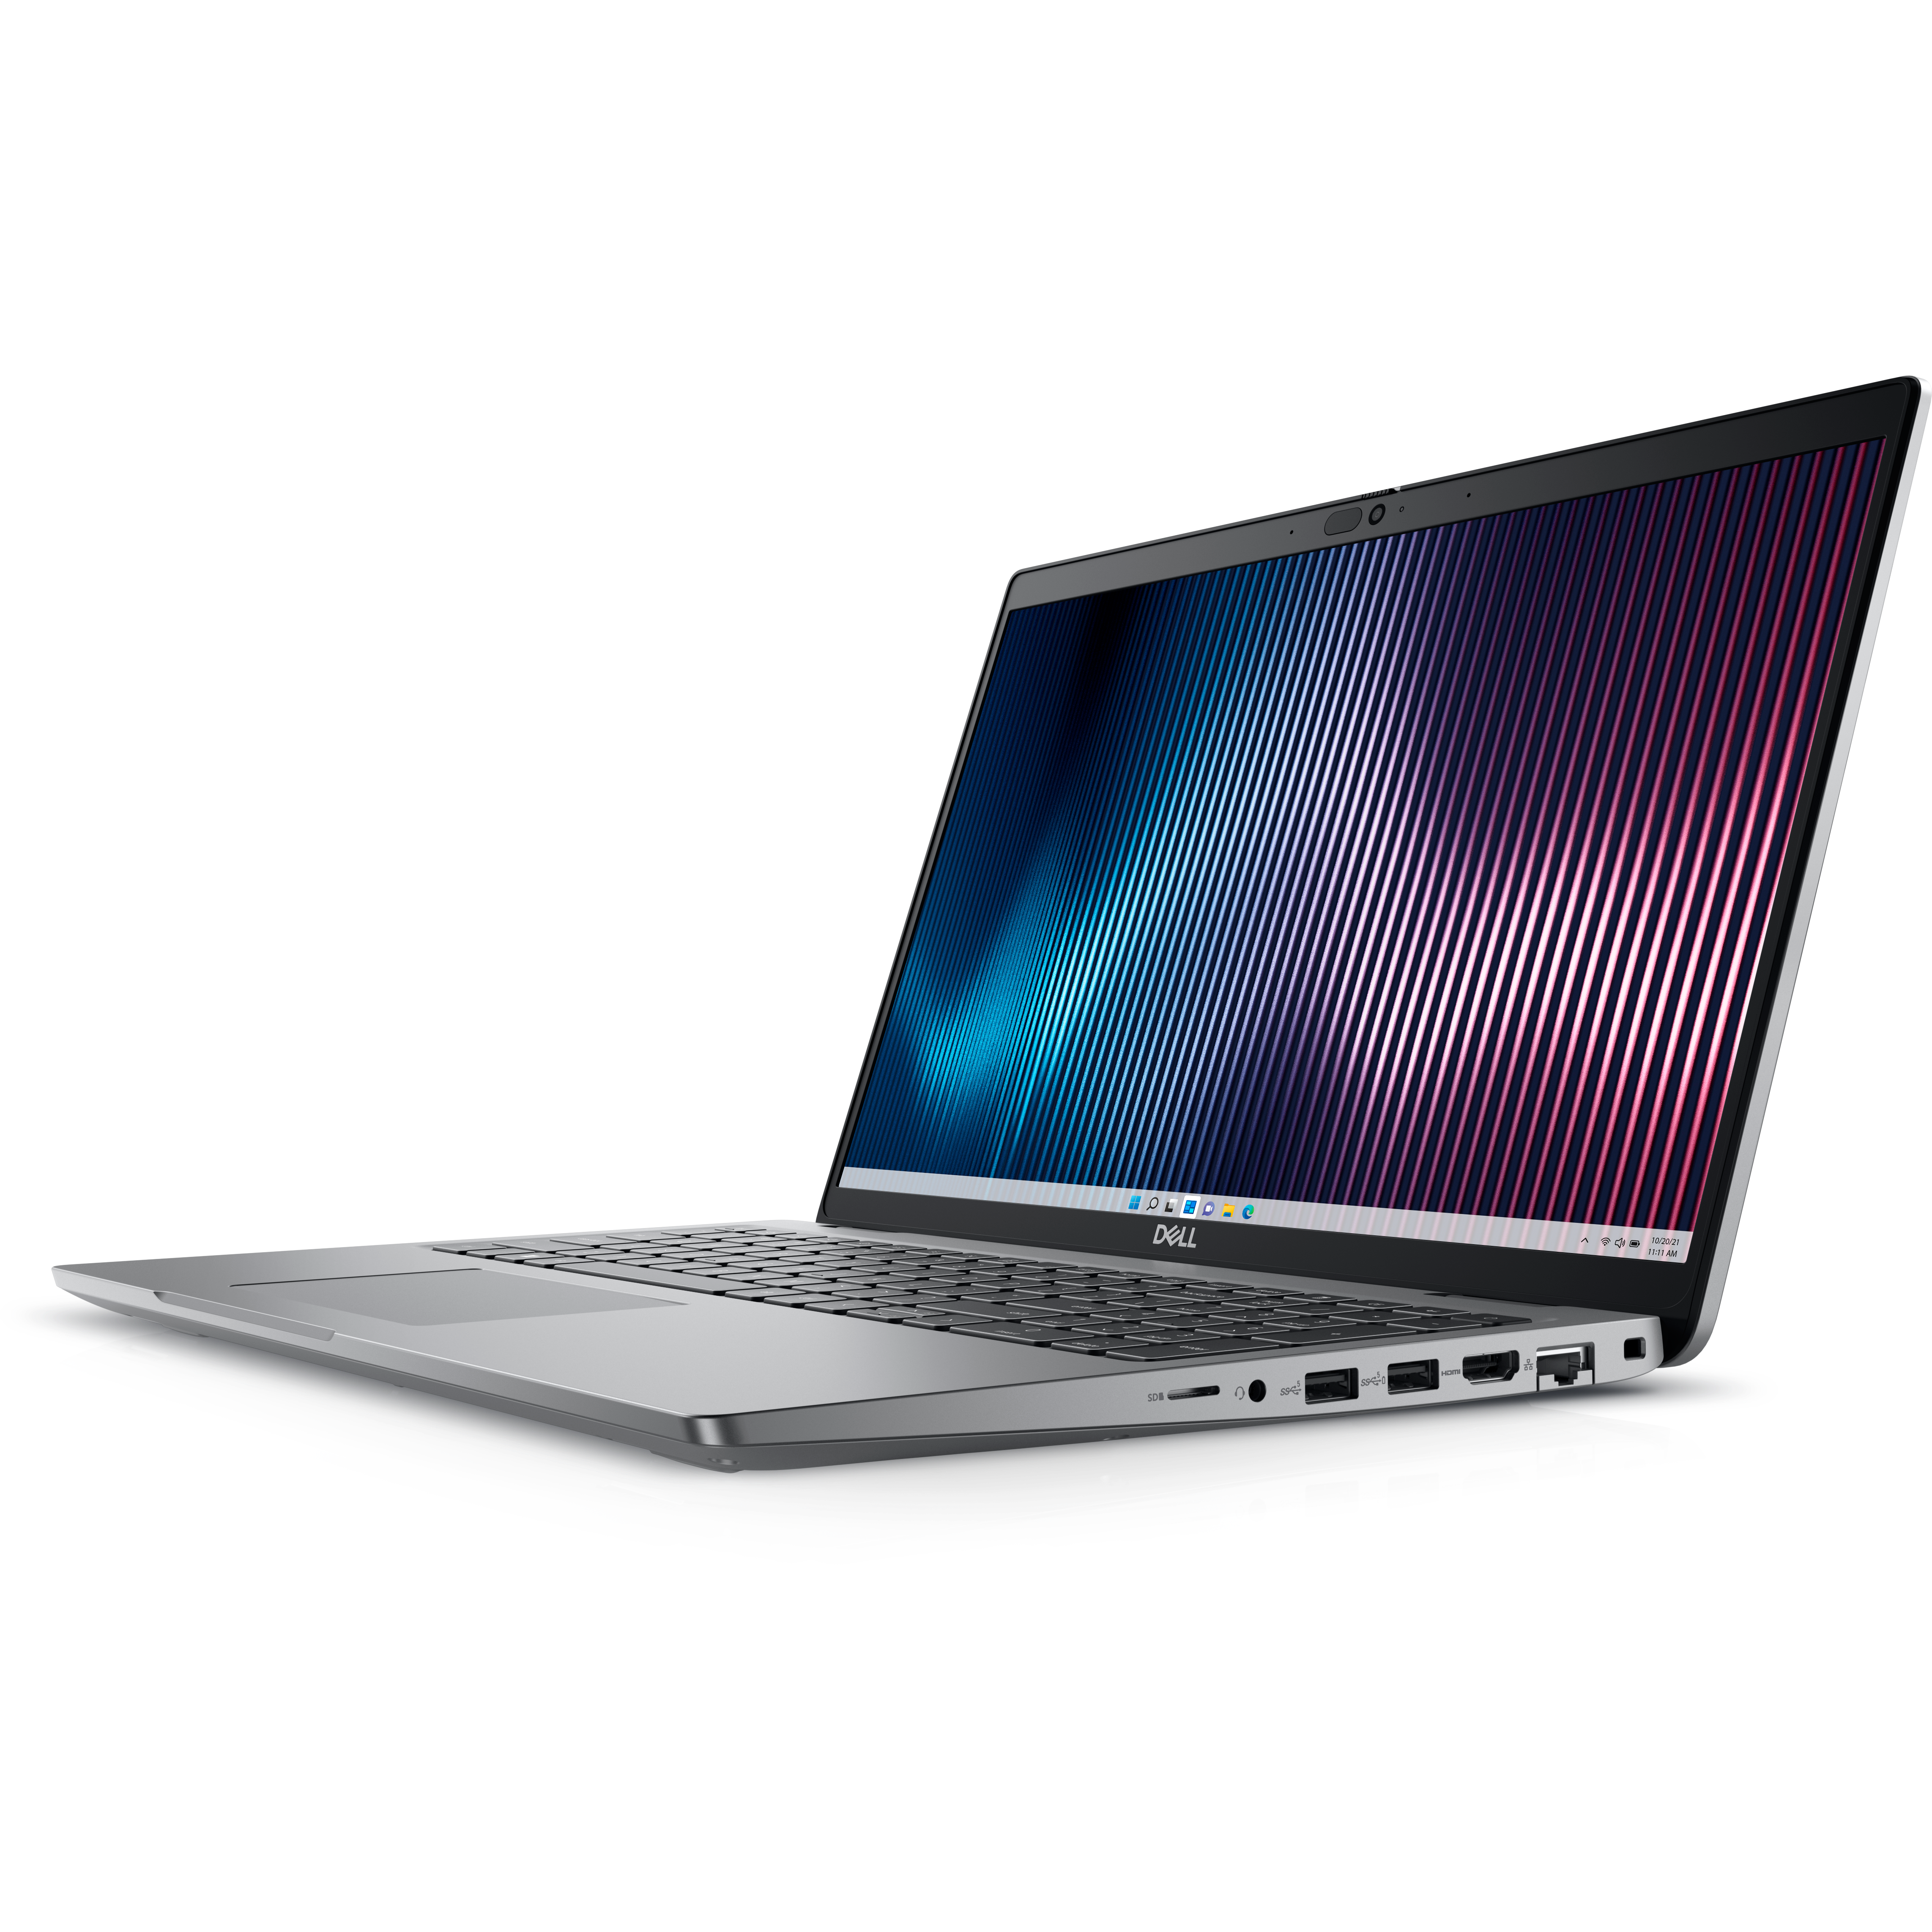 Angled front view of the Dell Latitude 5540 facing left